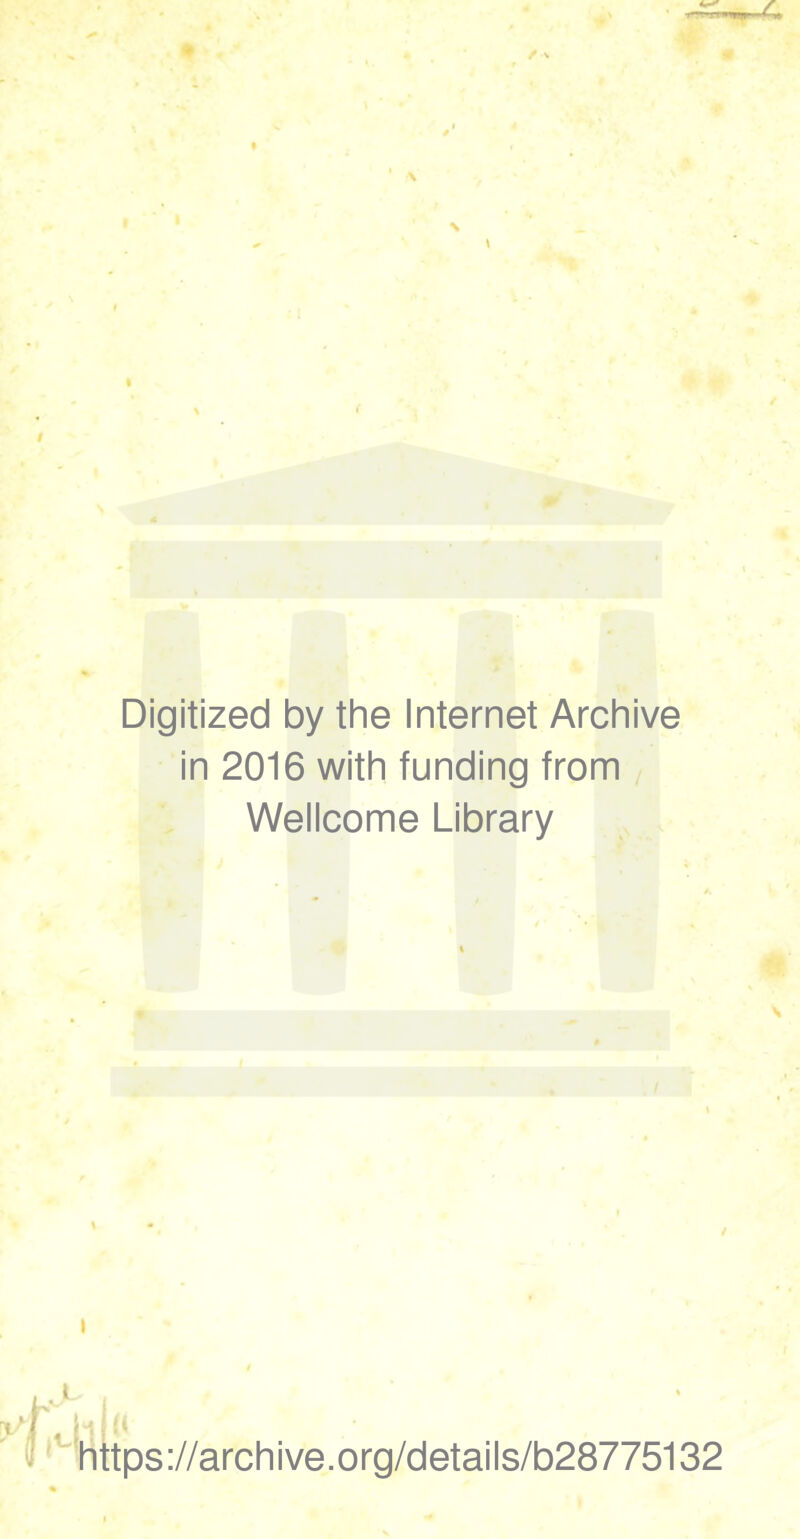 Digitized by the Internet Archive in 2016 with funding from Wellcome Library \ t , m https://archive.org/details/b28775132